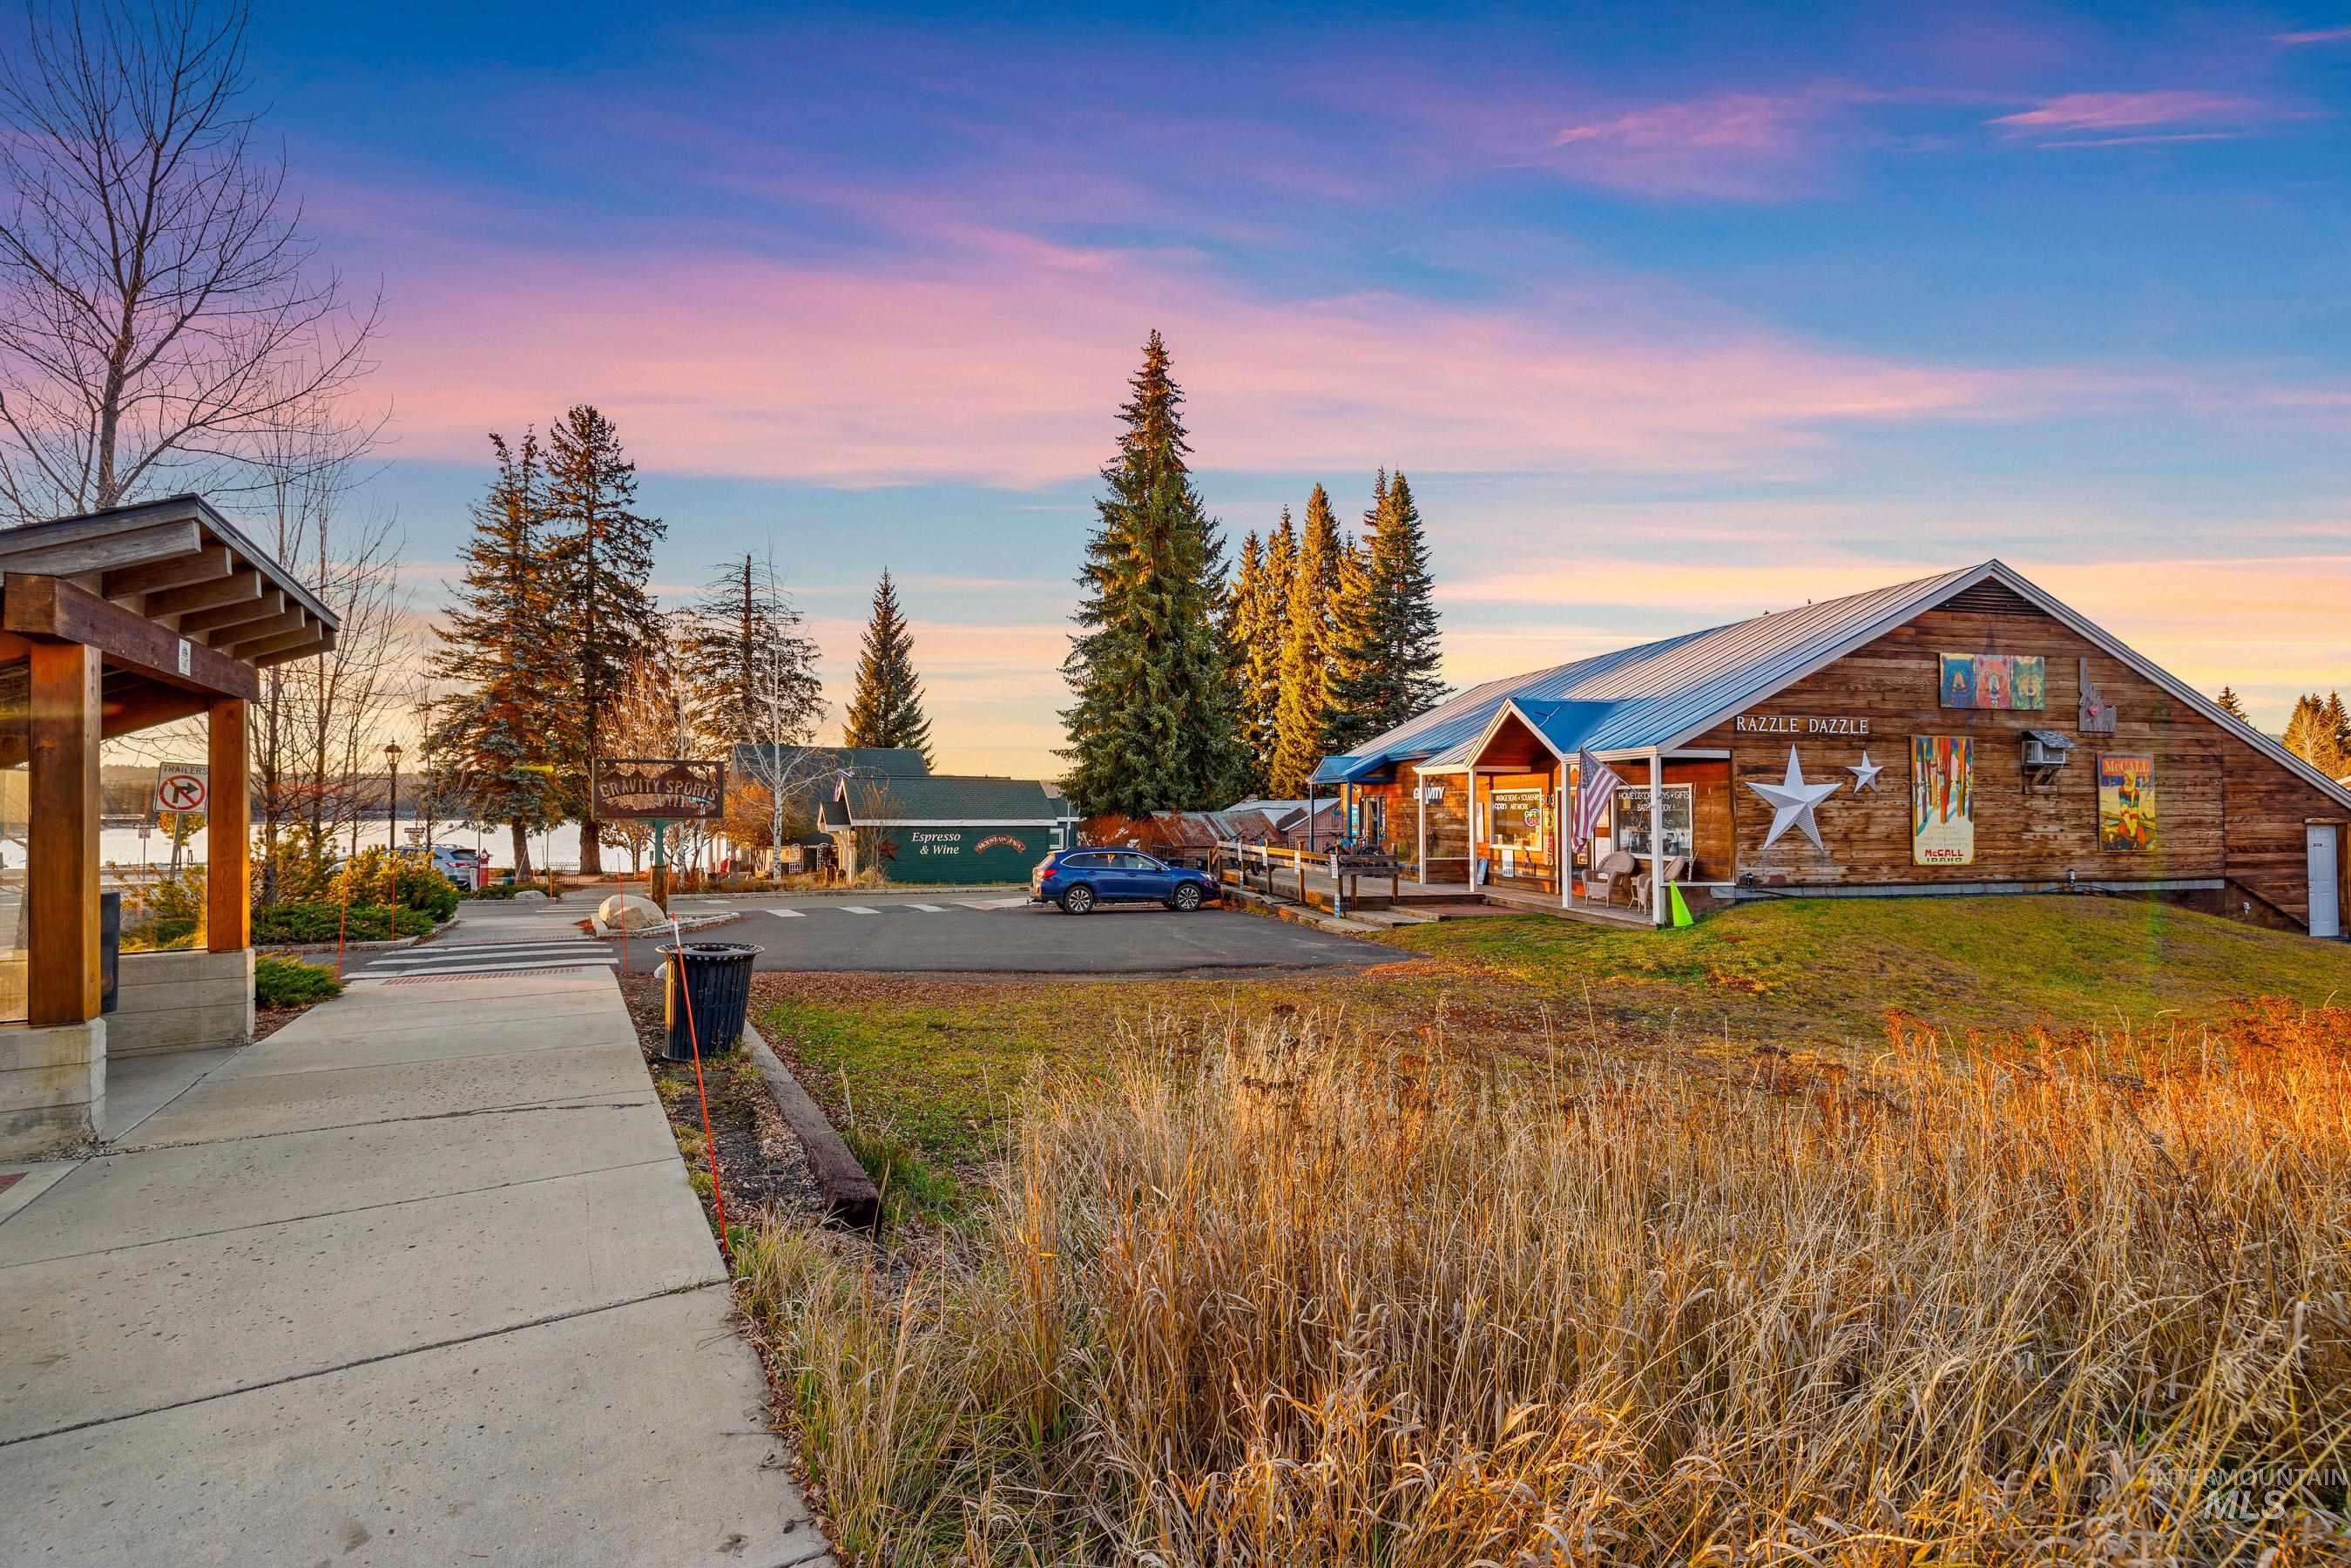 503 Pine Street, McCall, Idaho 83638, Business/Commercial For Sale, Price $1,850,000,MLS 98895347